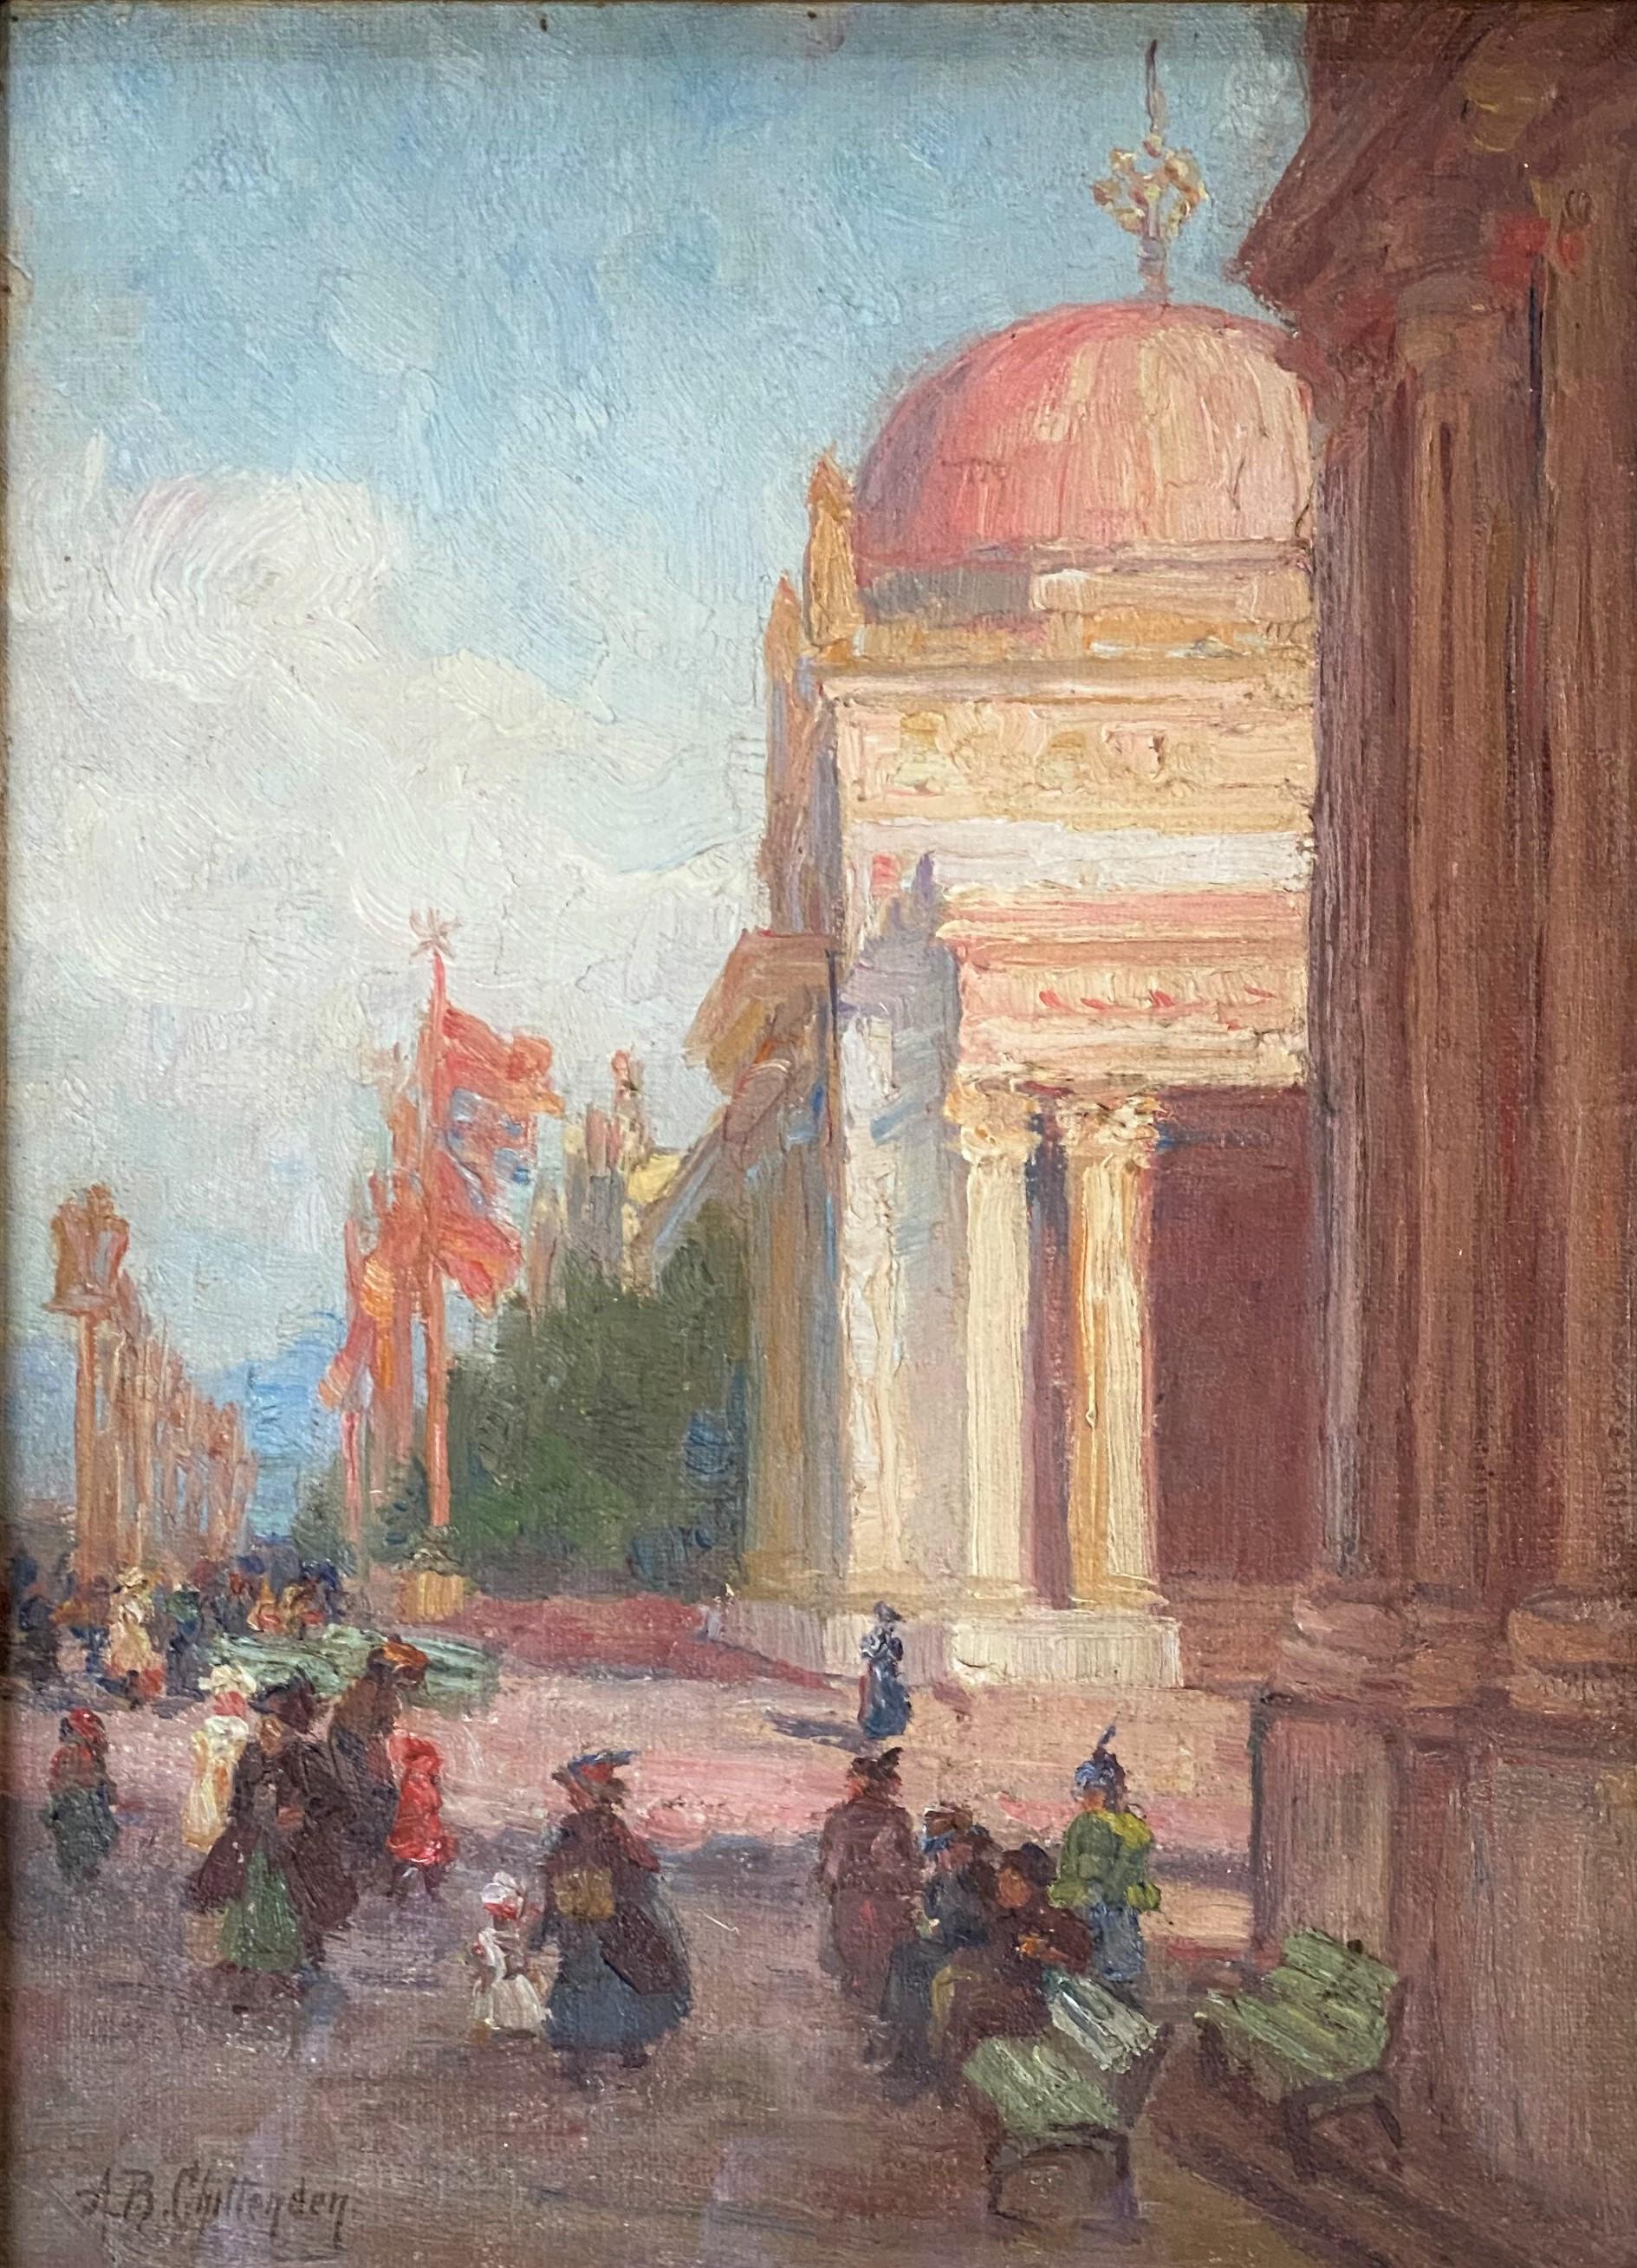 Pan Pacific Exposition, San Francisco, 1915 - Painting by Alice Brown Chittenden